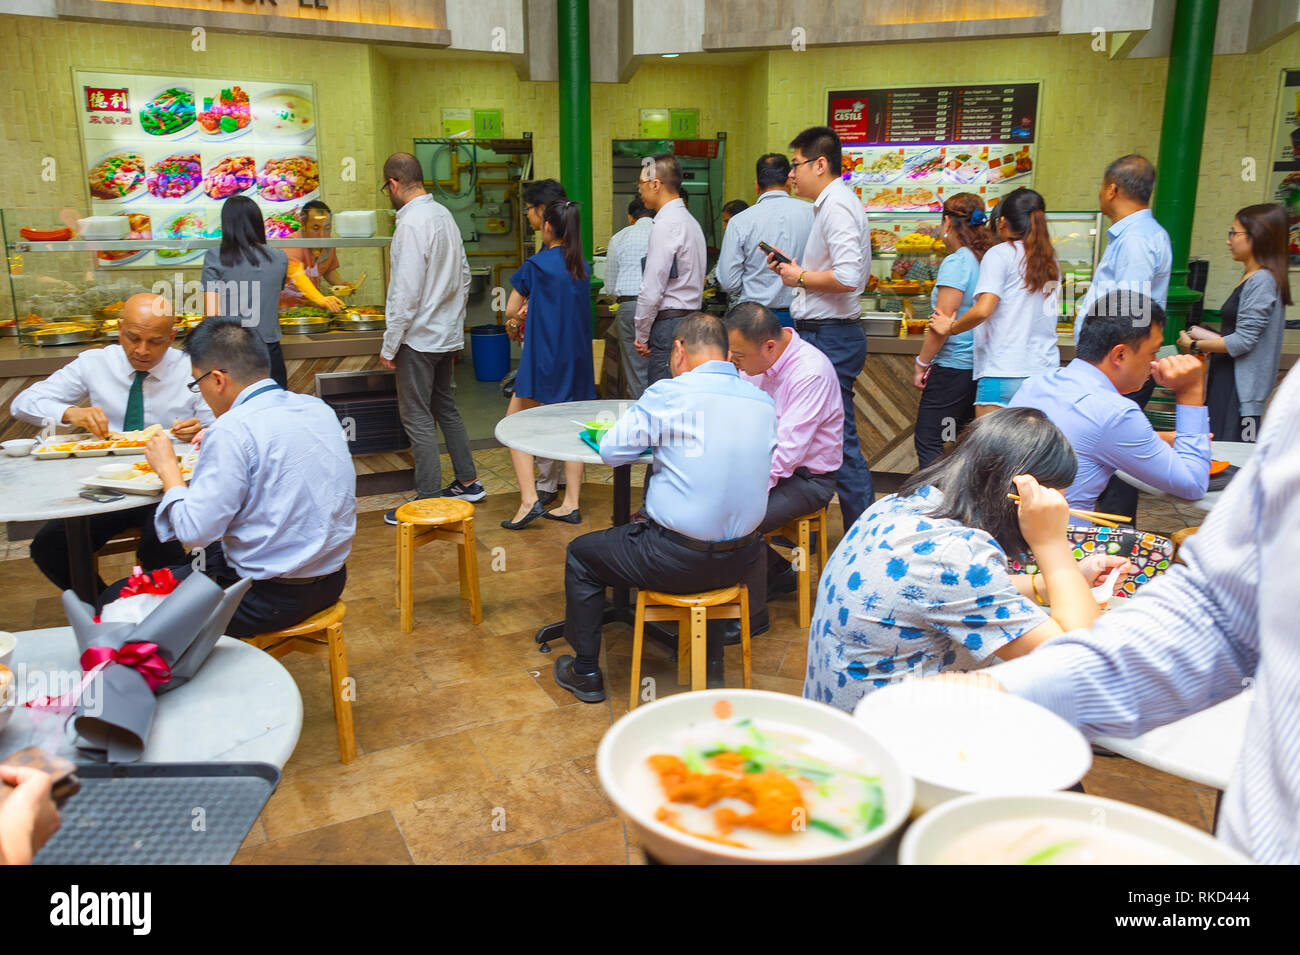 SINGAPORE - JAN 16, 2017 : People at popular food court in Singapore. Inexpensive food stalls are numerous in the city so most Singaporeans dine out a Stock Photo